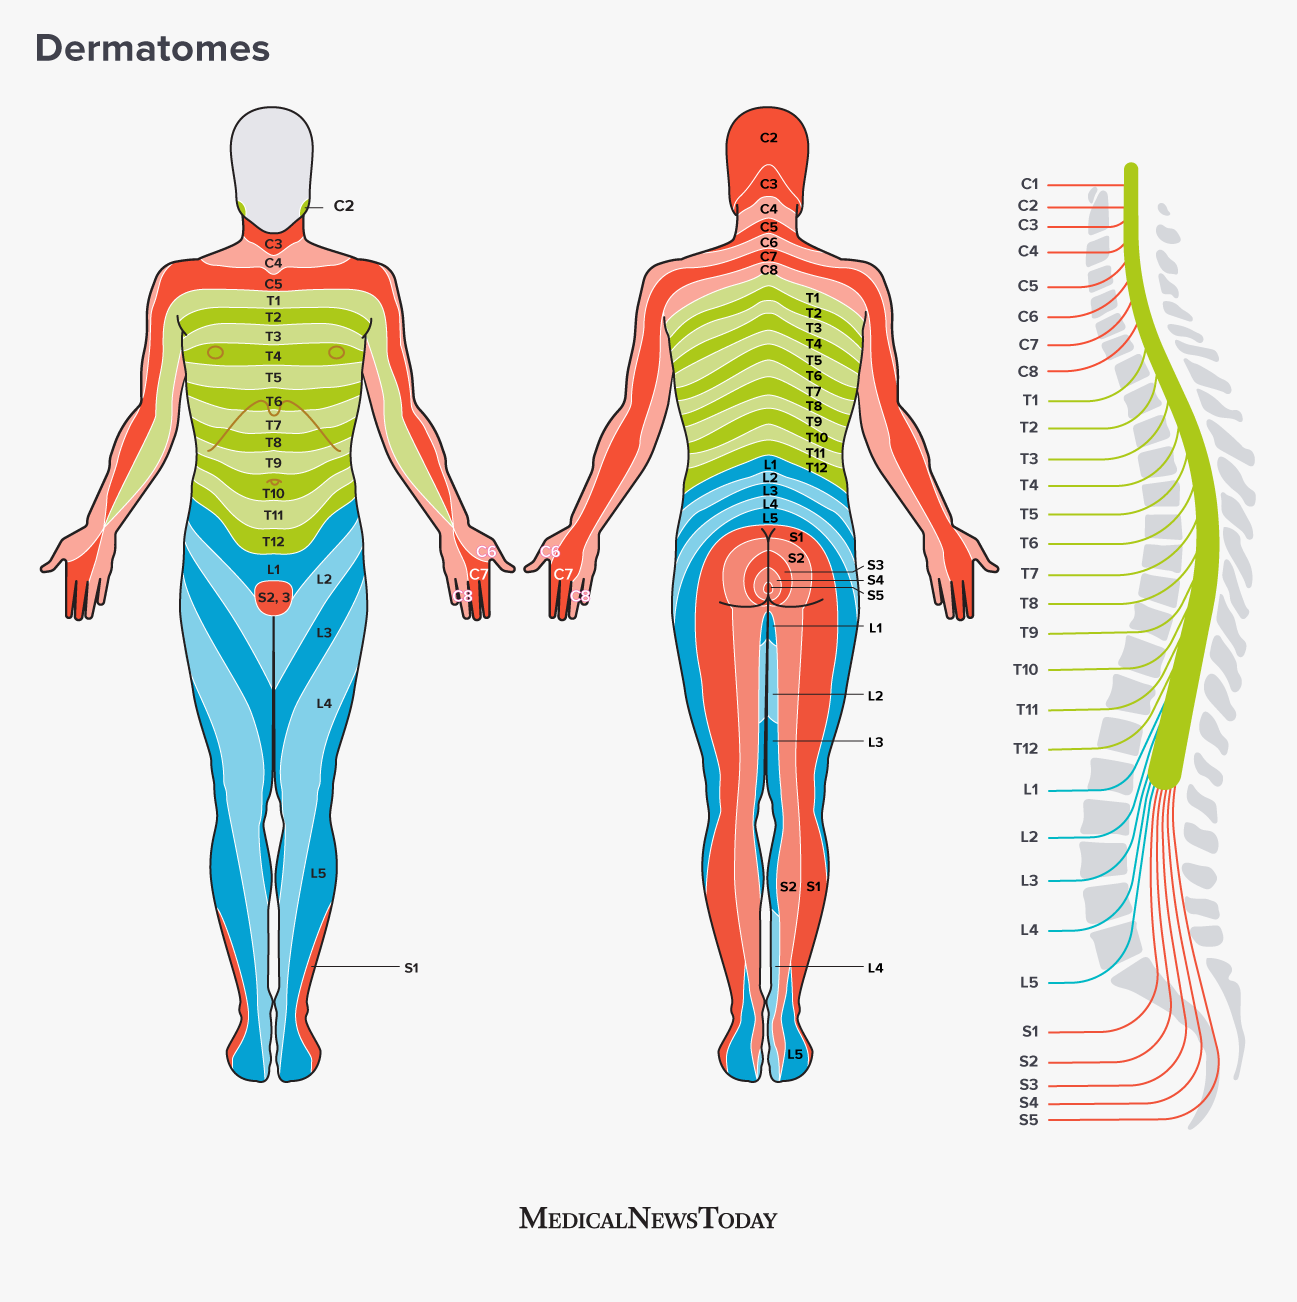 Dermatomes: Definition, chart, and diagram